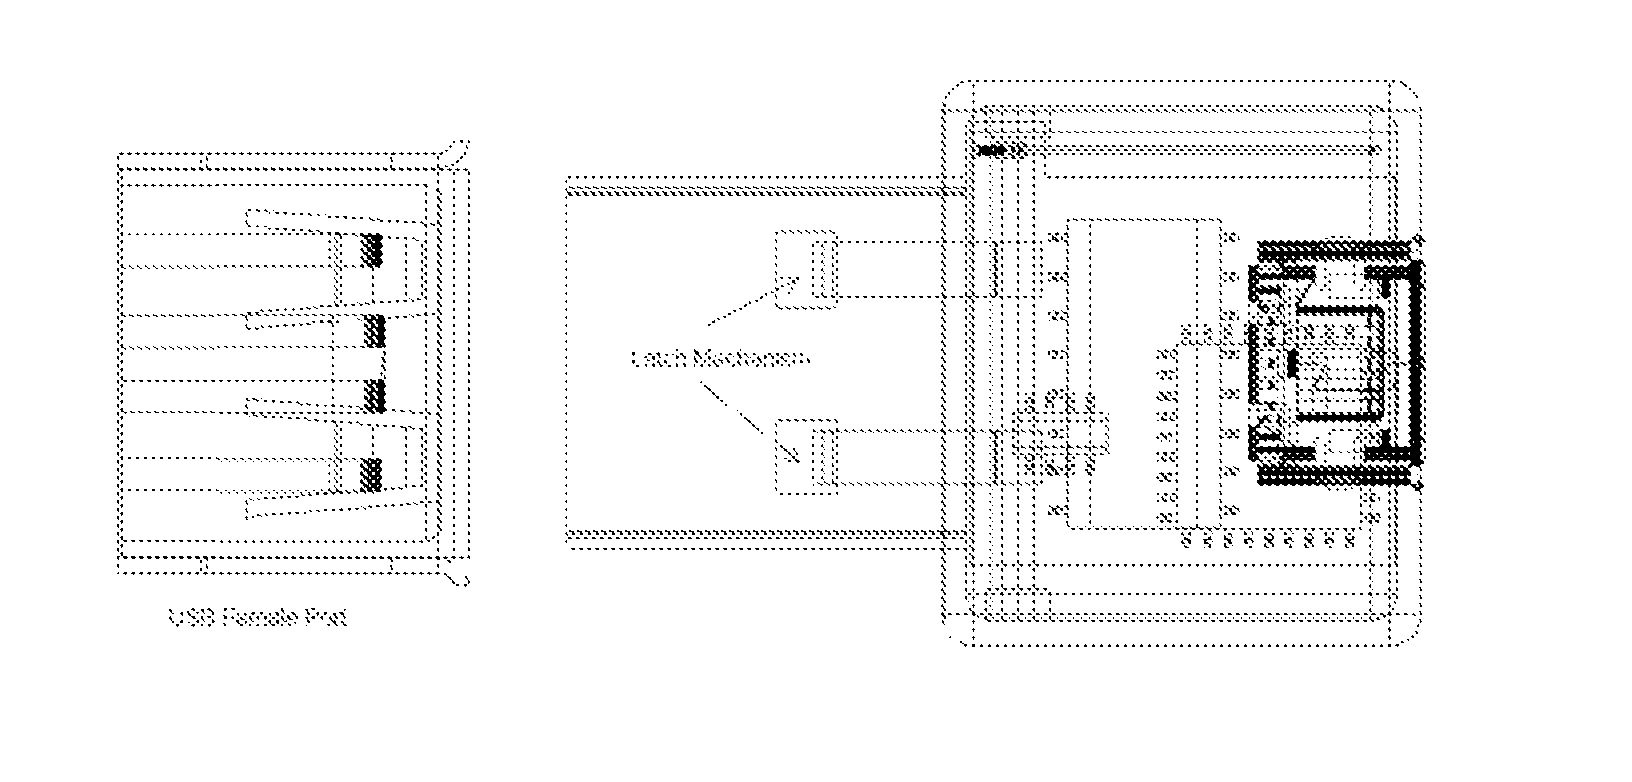 System and method for securing a computer port using shape memory alloys